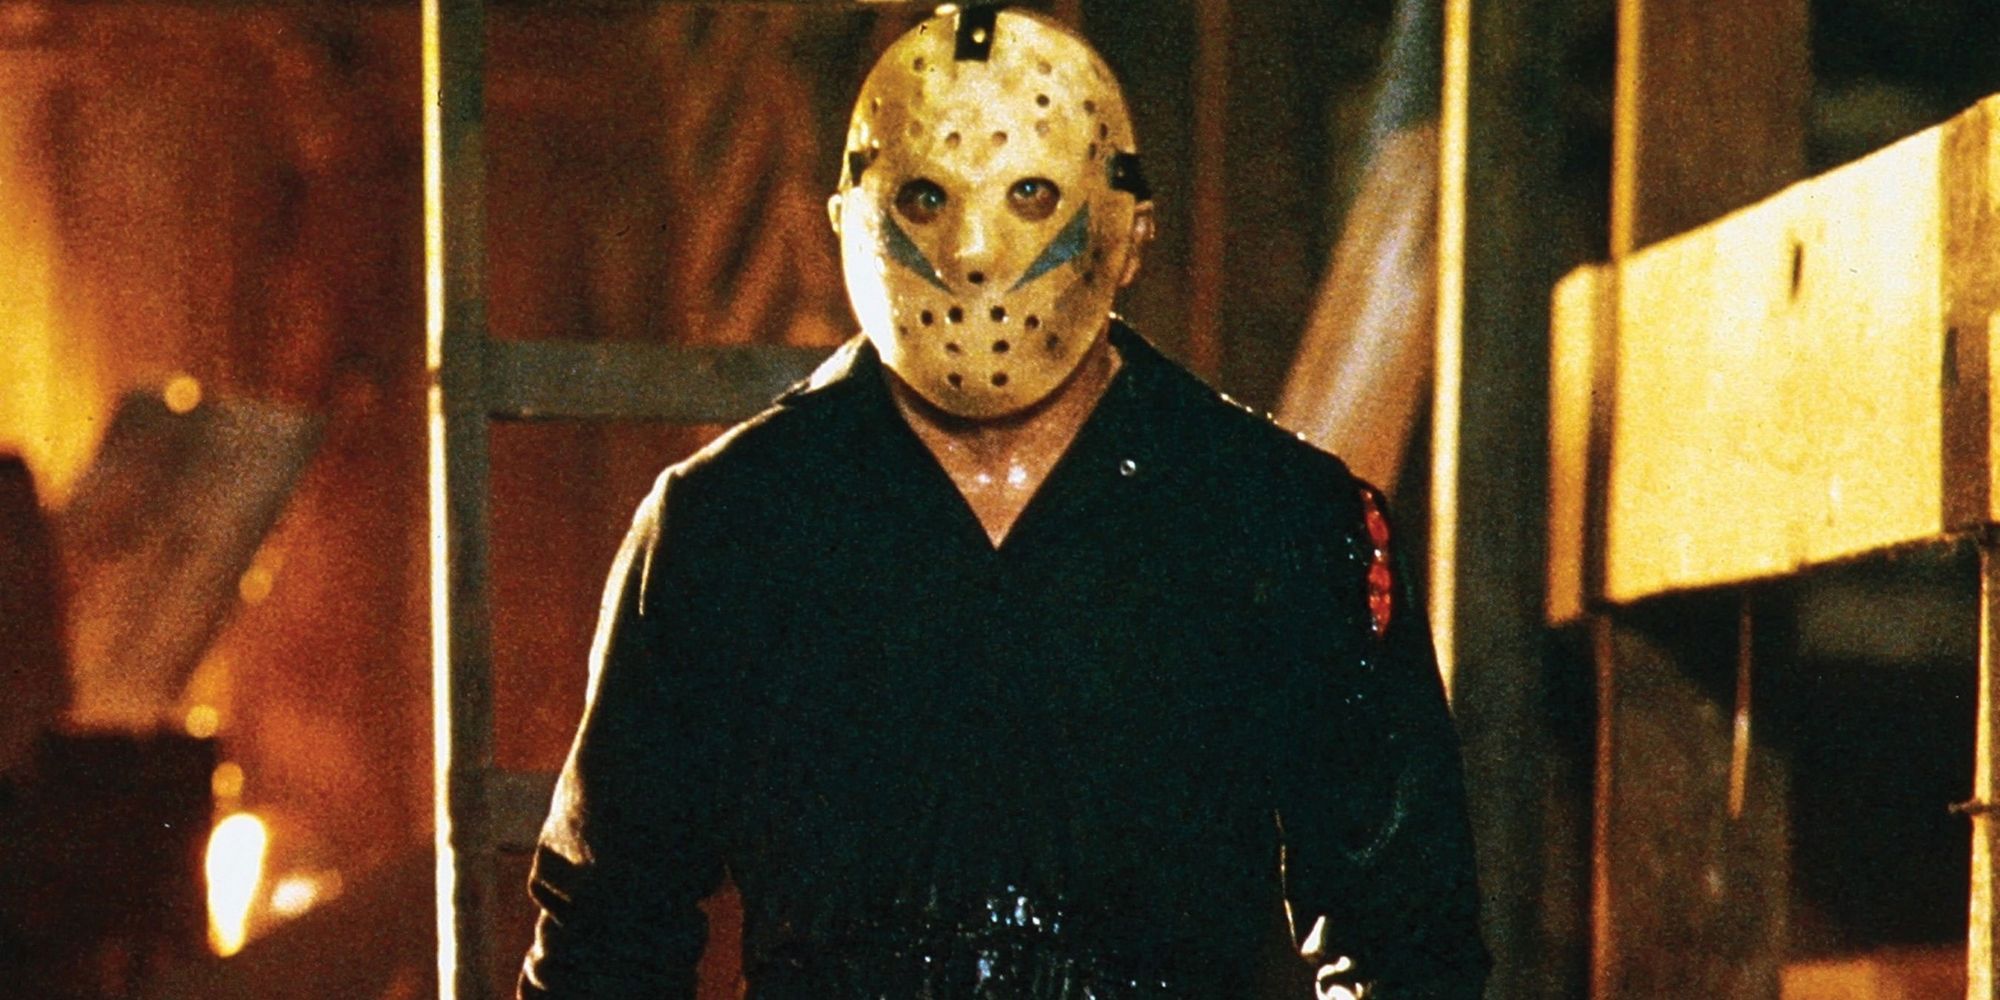 Jason Voorhees from the Friday the 13th film series